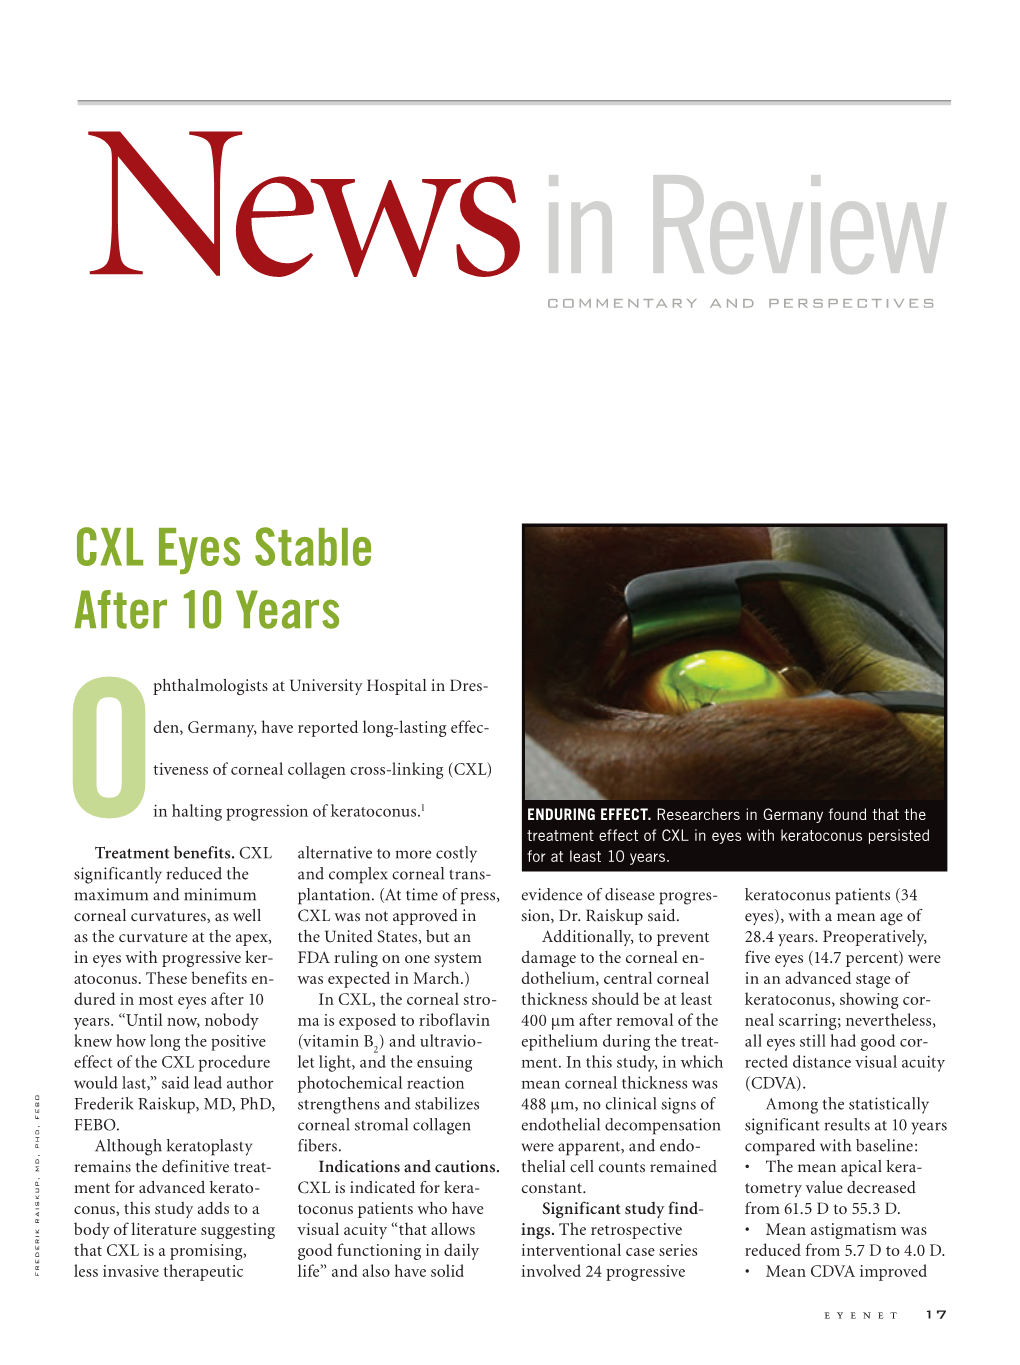 CXL Eyes Stable After 10 Years